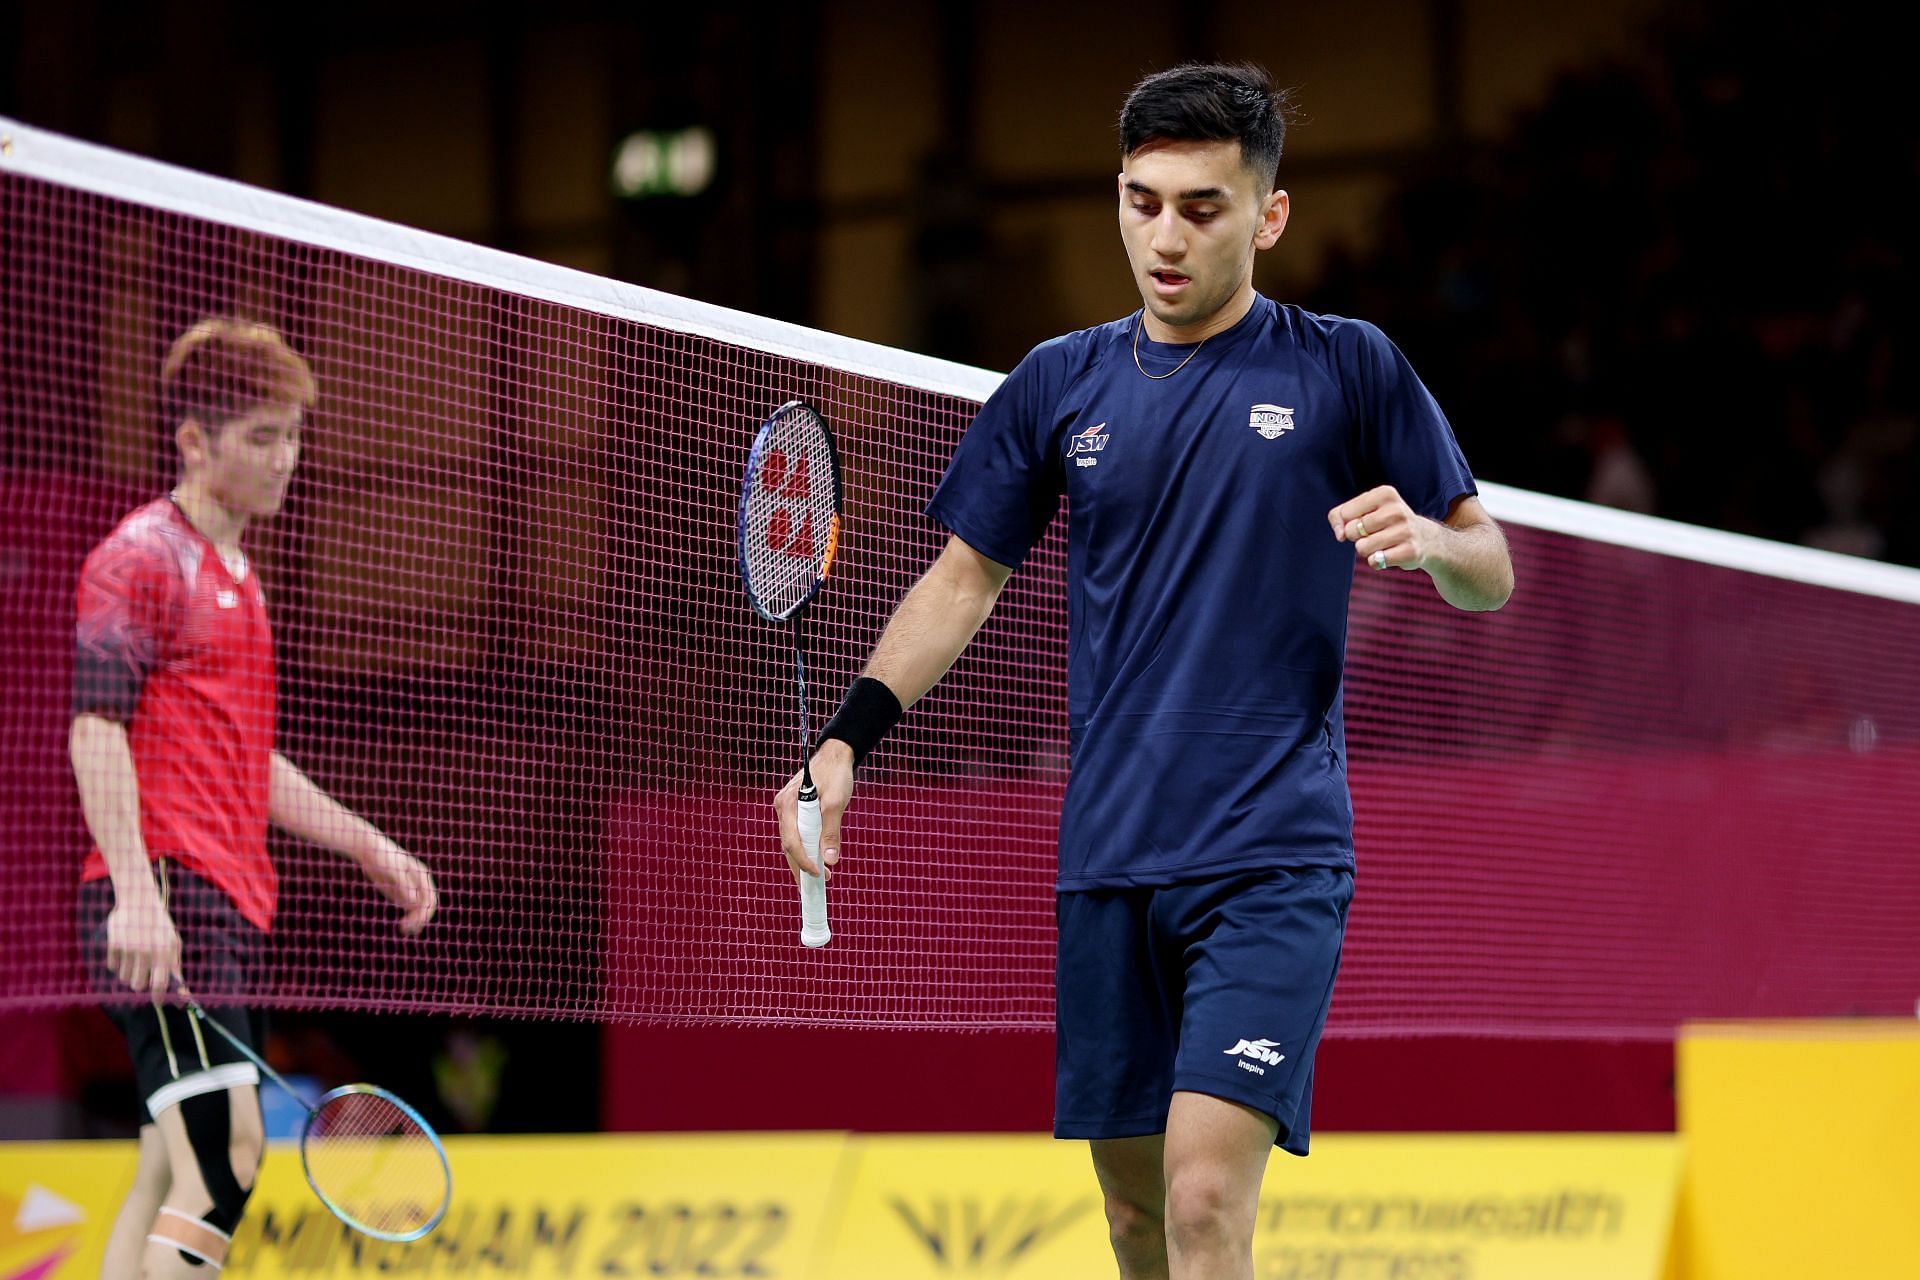 Thailand Open 2023 Lakshya Sen vs Kunlavut Vitidsarn preview, head-to-head, prediction, where to watch and live streaming details